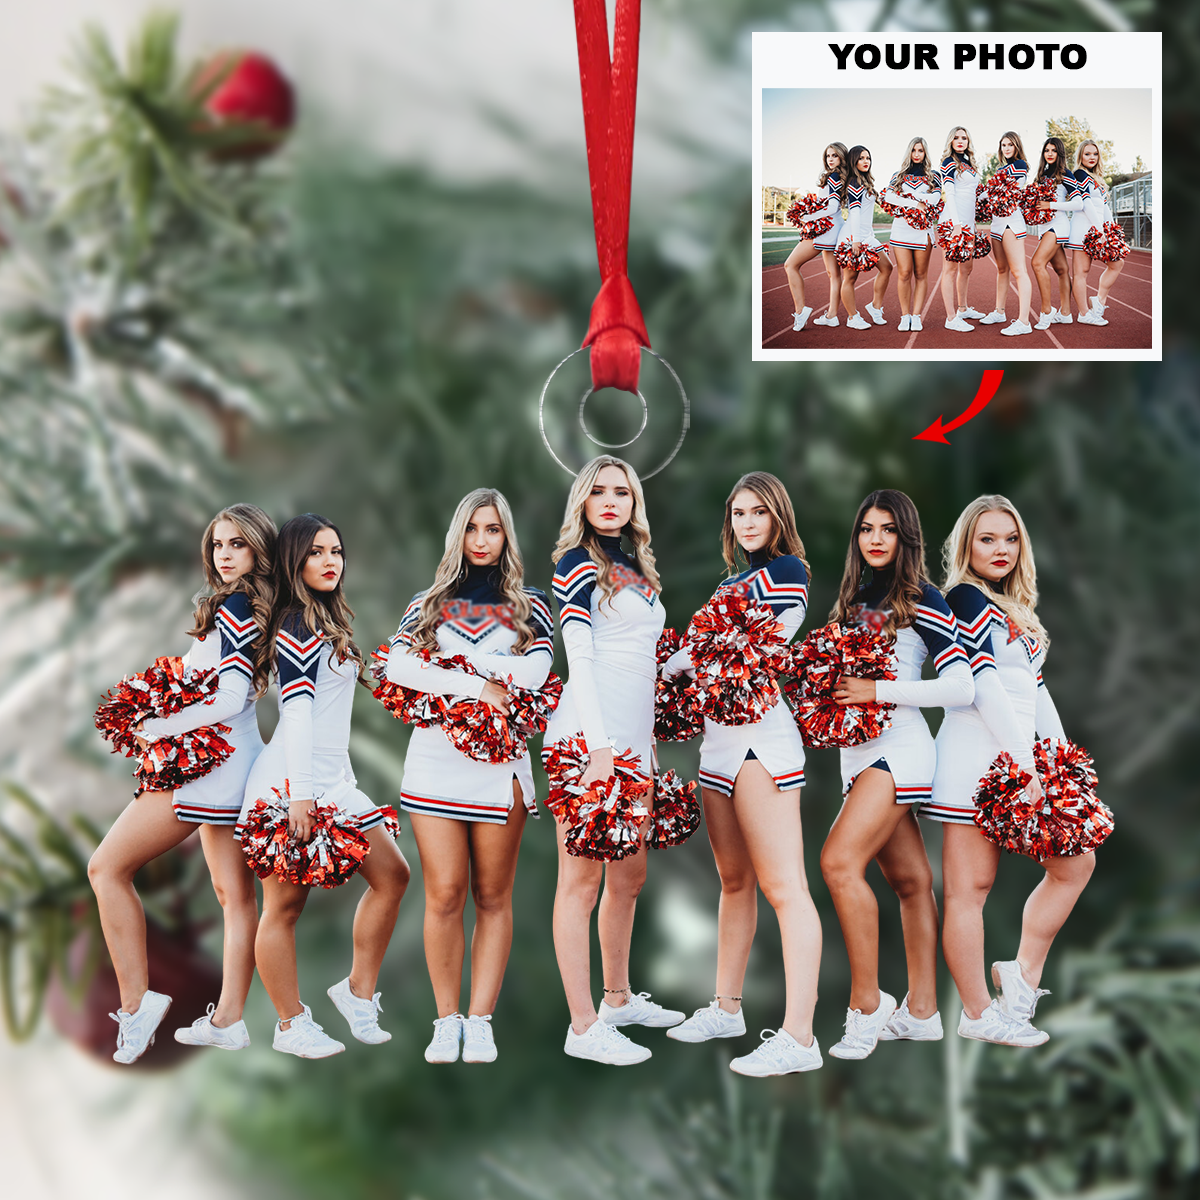 Cheerleaders - Personalized Photo Mica Ornament -  Customized Your Photo Ornament - Christmas Gift For Cheerleaders, Cheer Team, Friends